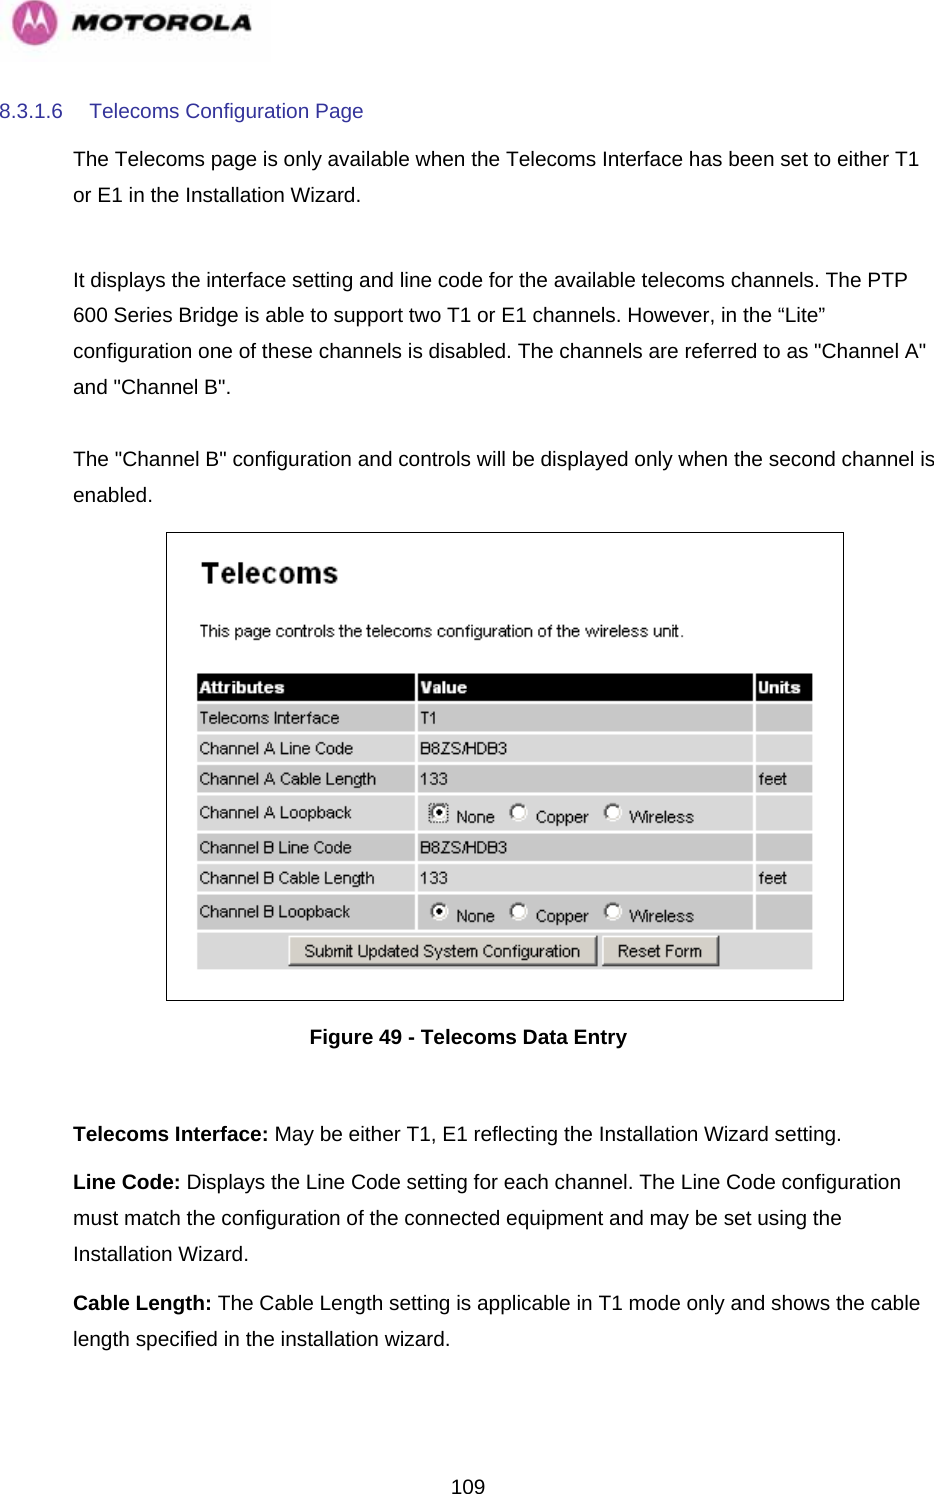   1098.3.1.6  Telecoms Configuration Page The Telecoms page is only available when the Telecoms Interface has been set to either T1 or E1 in the Installation Wizard.   It displays the interface setting and line code for the available telecoms channels. The PTP 600 Series Bridge is able to support two T1 or E1 channels. However, in the “Lite” configuration one of these channels is disabled. The channels are referred to as &quot;Channel A&quot; and &quot;Channel B&quot;.   The &quot;Channel B&quot; configuration and controls will be displayed only when the second channel is enabled.   Figure 49 - Telecoms Data Entry  Telecoms Interface: May be either T1, E1 reflecting the Installation Wizard setting. Line Code: Displays the Line Code setting for each channel. The Line Code configuration must match the configuration of the connected equipment and may be set using the Installation Wizard.  Cable Length: The Cable Length setting is applicable in T1 mode only and shows the cable length specified in the installation wizard.  